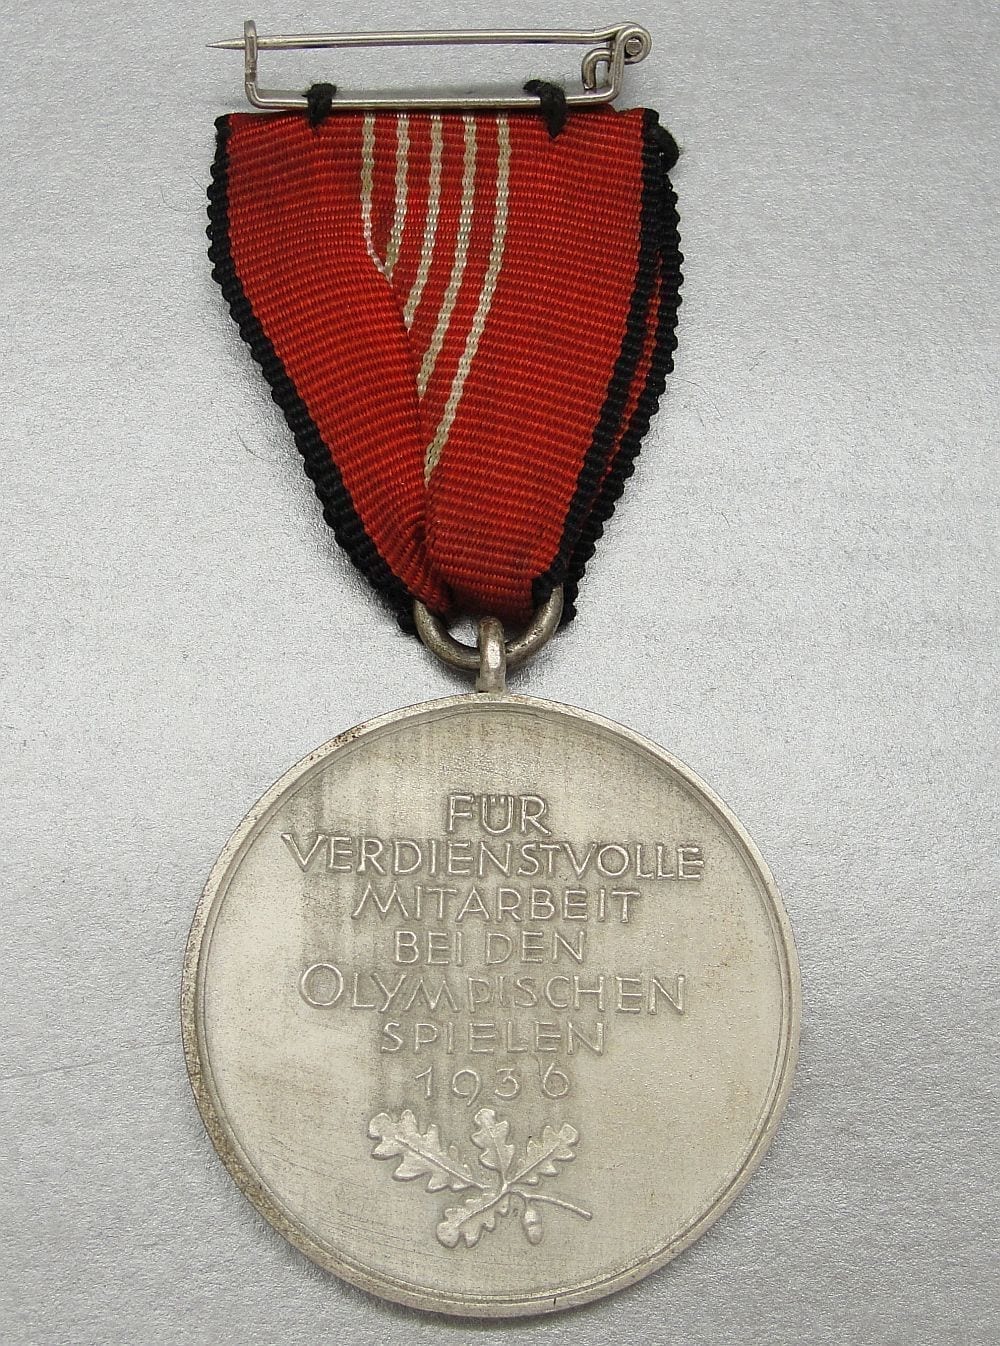 Cased 1936 Olympic Service Medal